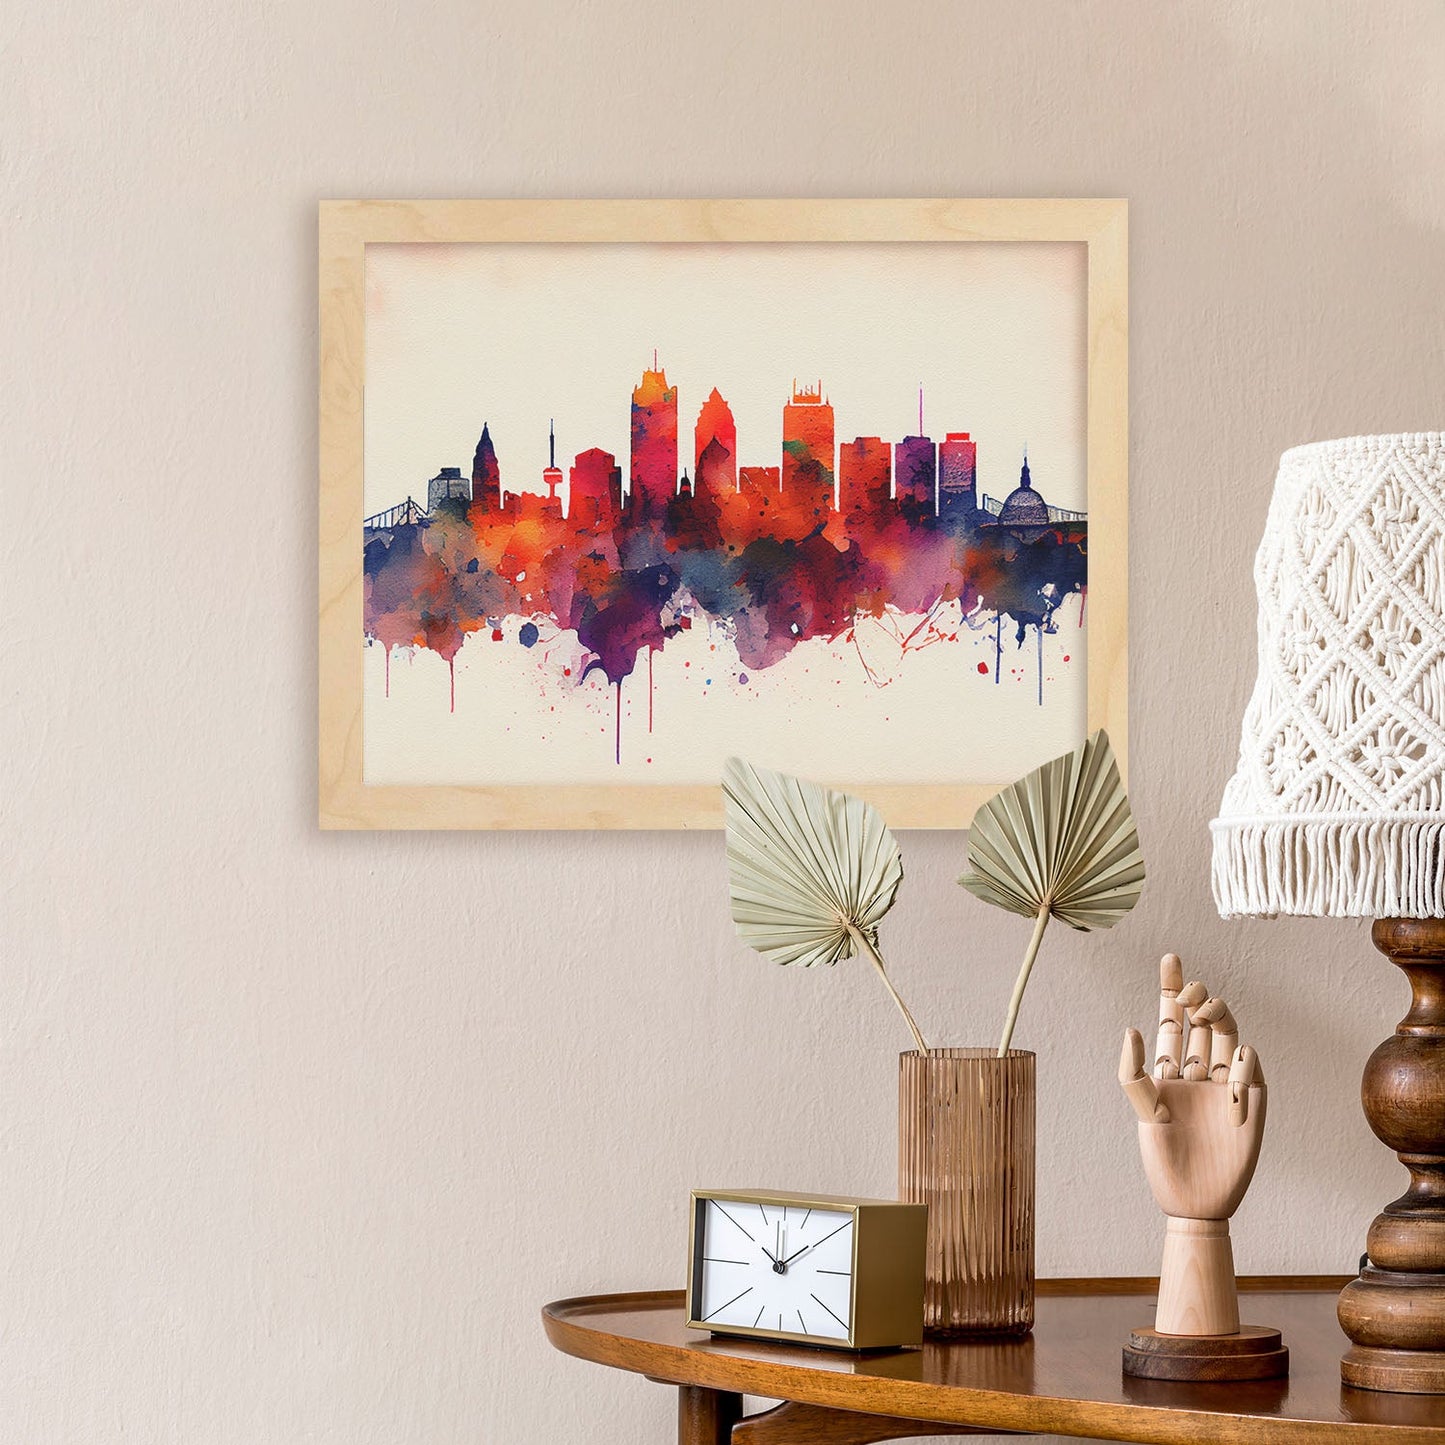 Nacnic watercolor of a skyline of the city of Boston_3. Aesthetic Wall Art Prints for Bedroom or Living Room Design.